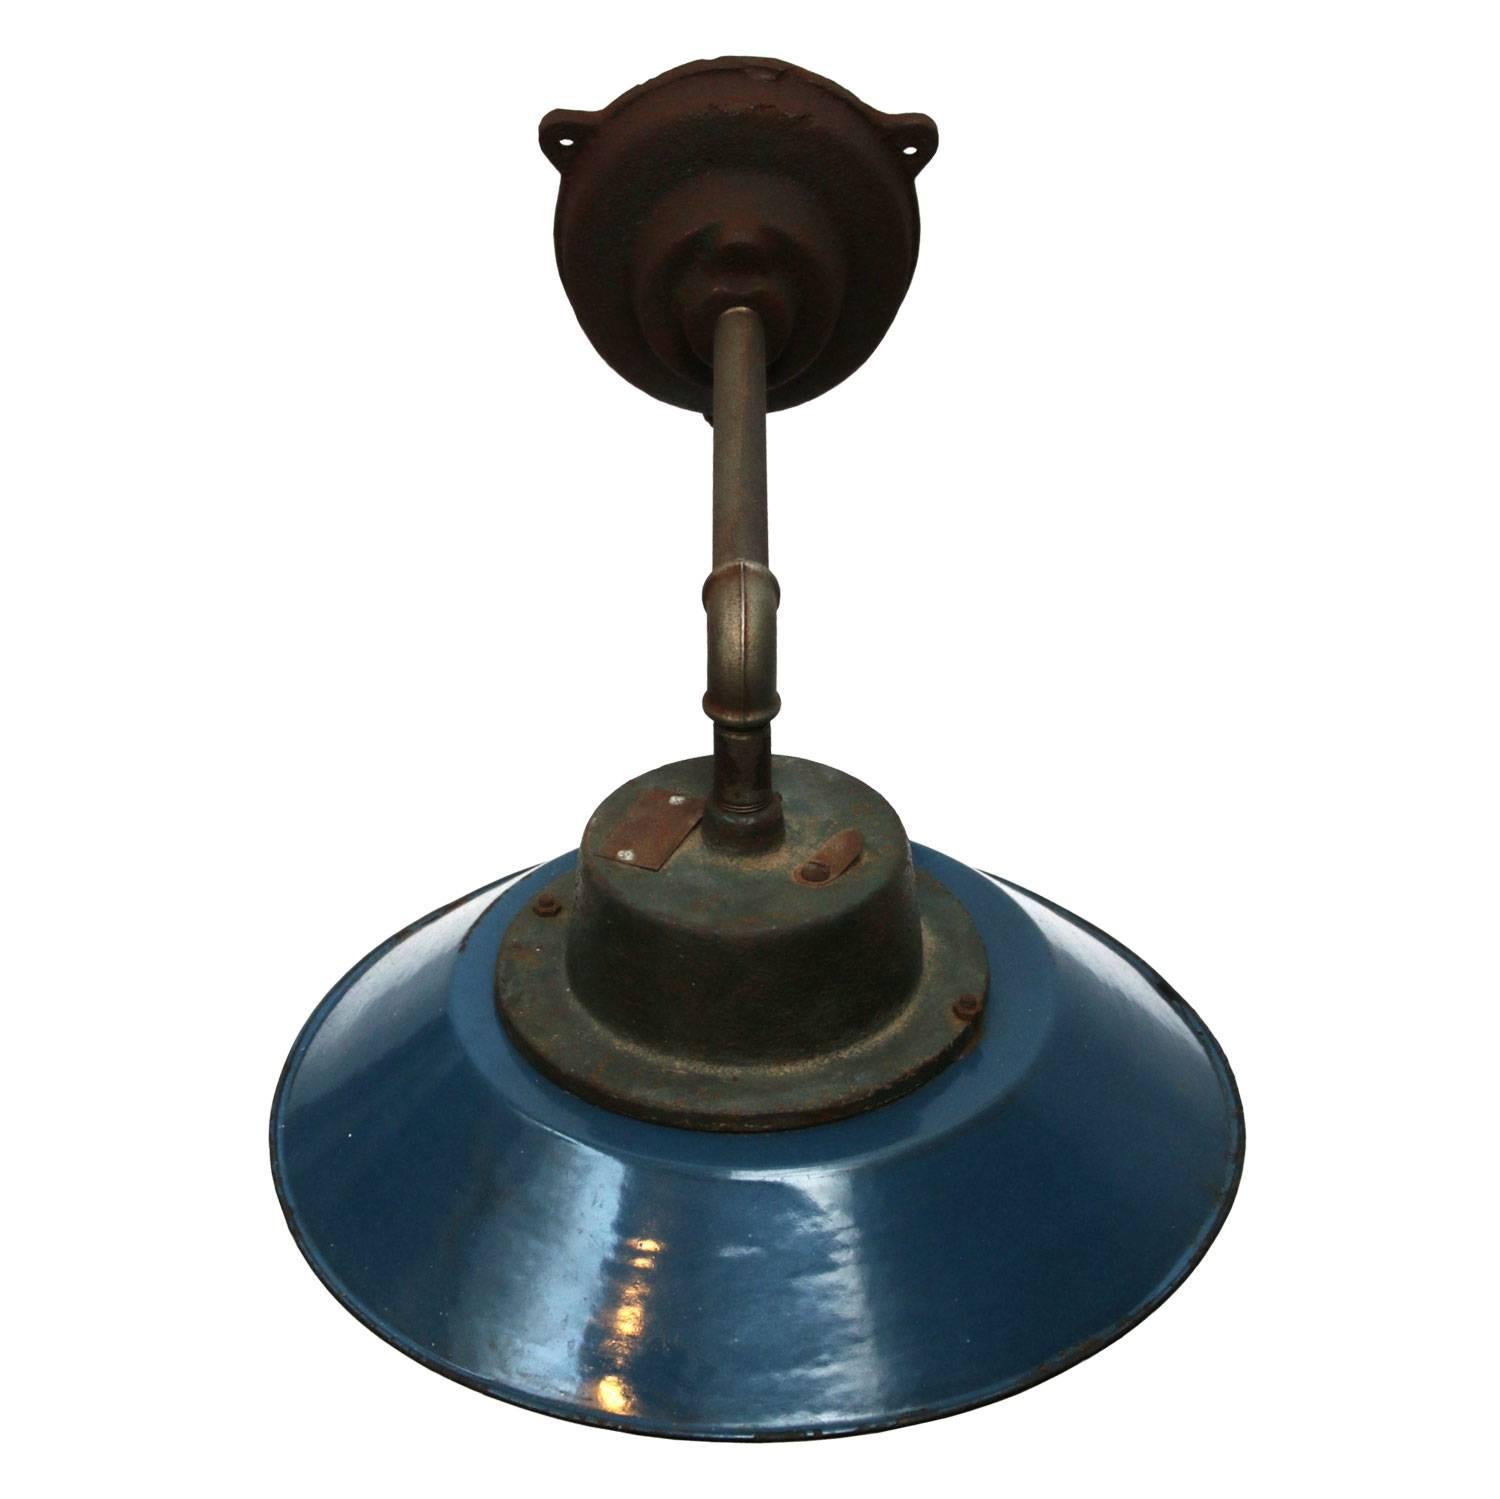 Arlo wand blue. Blue colored enamel Industrial wall light with white interior. Clear glass.
Diameter cast iron wall mount: 12 cm, 3 holes to secure,

weight: 5.5 kg / 12.1 lb

For use outdoors as well as indoors. 

All lamps have been made